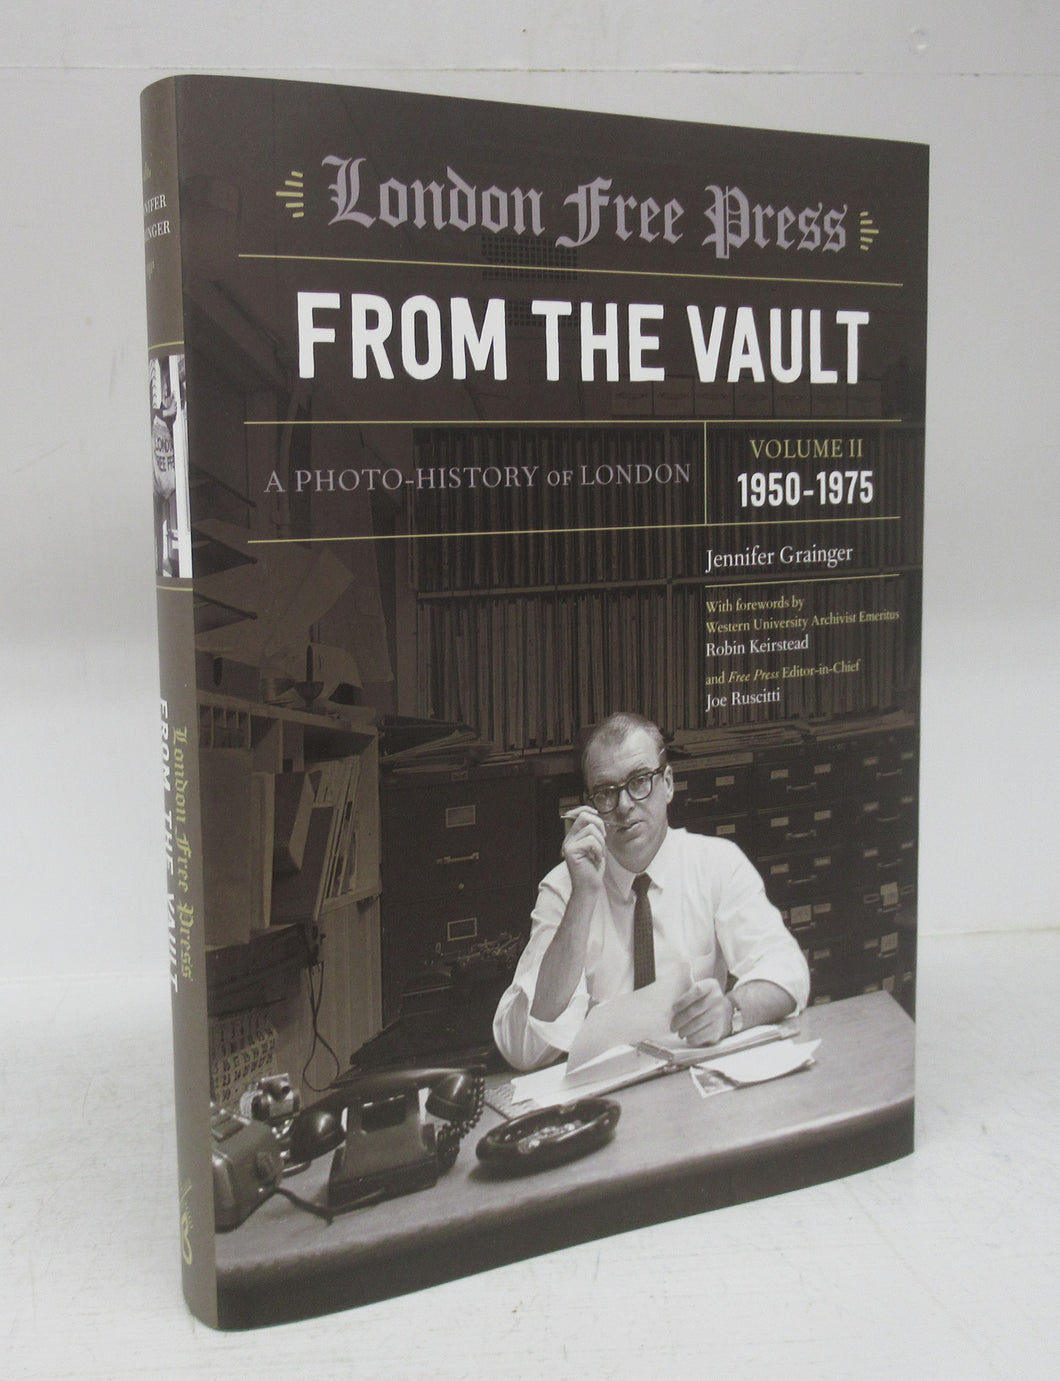 London Free Press. From The Vault: A Photo-History of London. Volume II 1950-1975